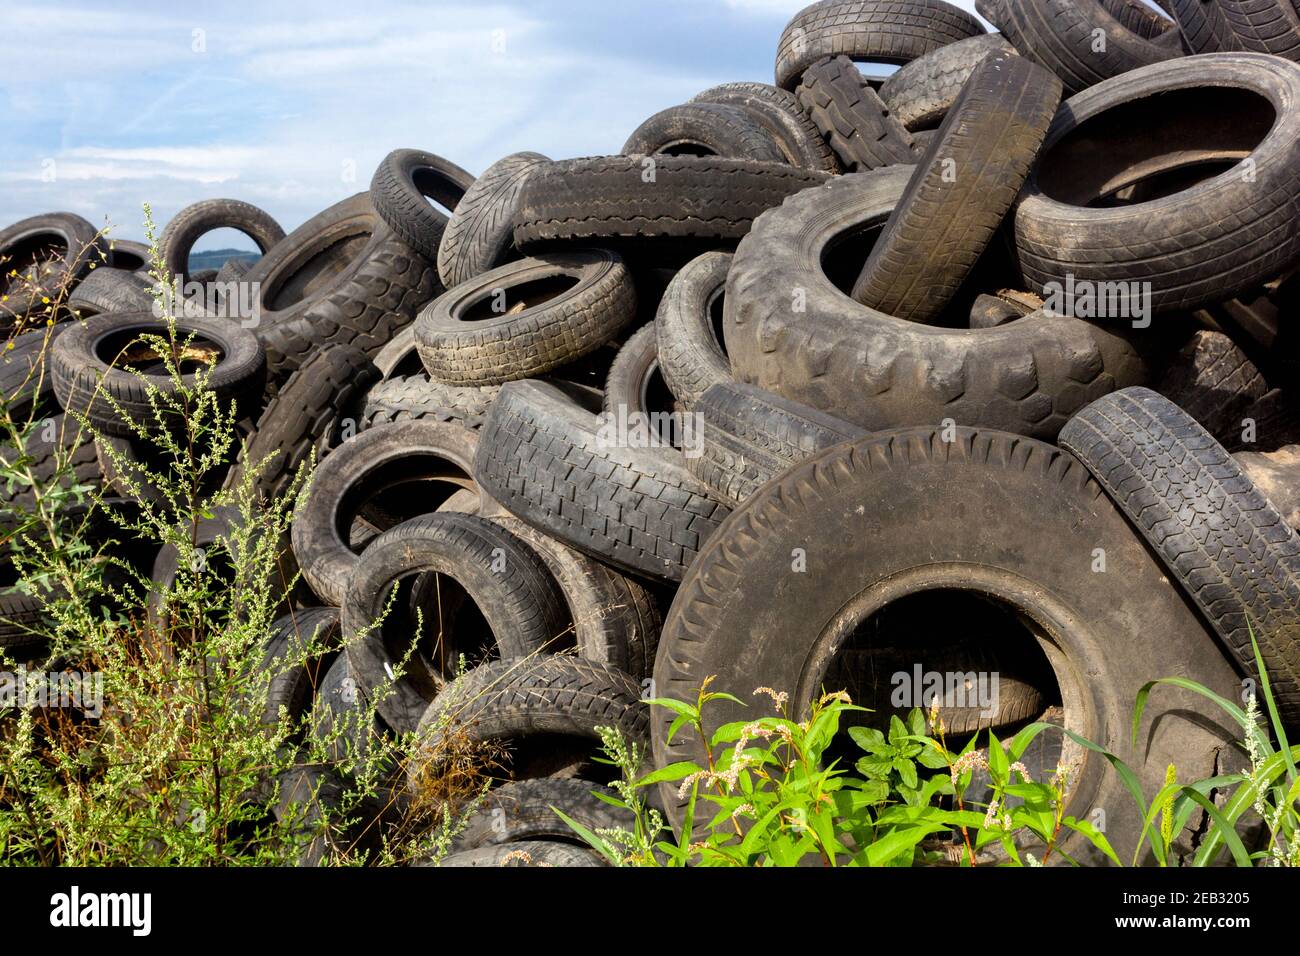 Old tires garbage depot rubbish car tires used waste heap trash dumped Stock Photo